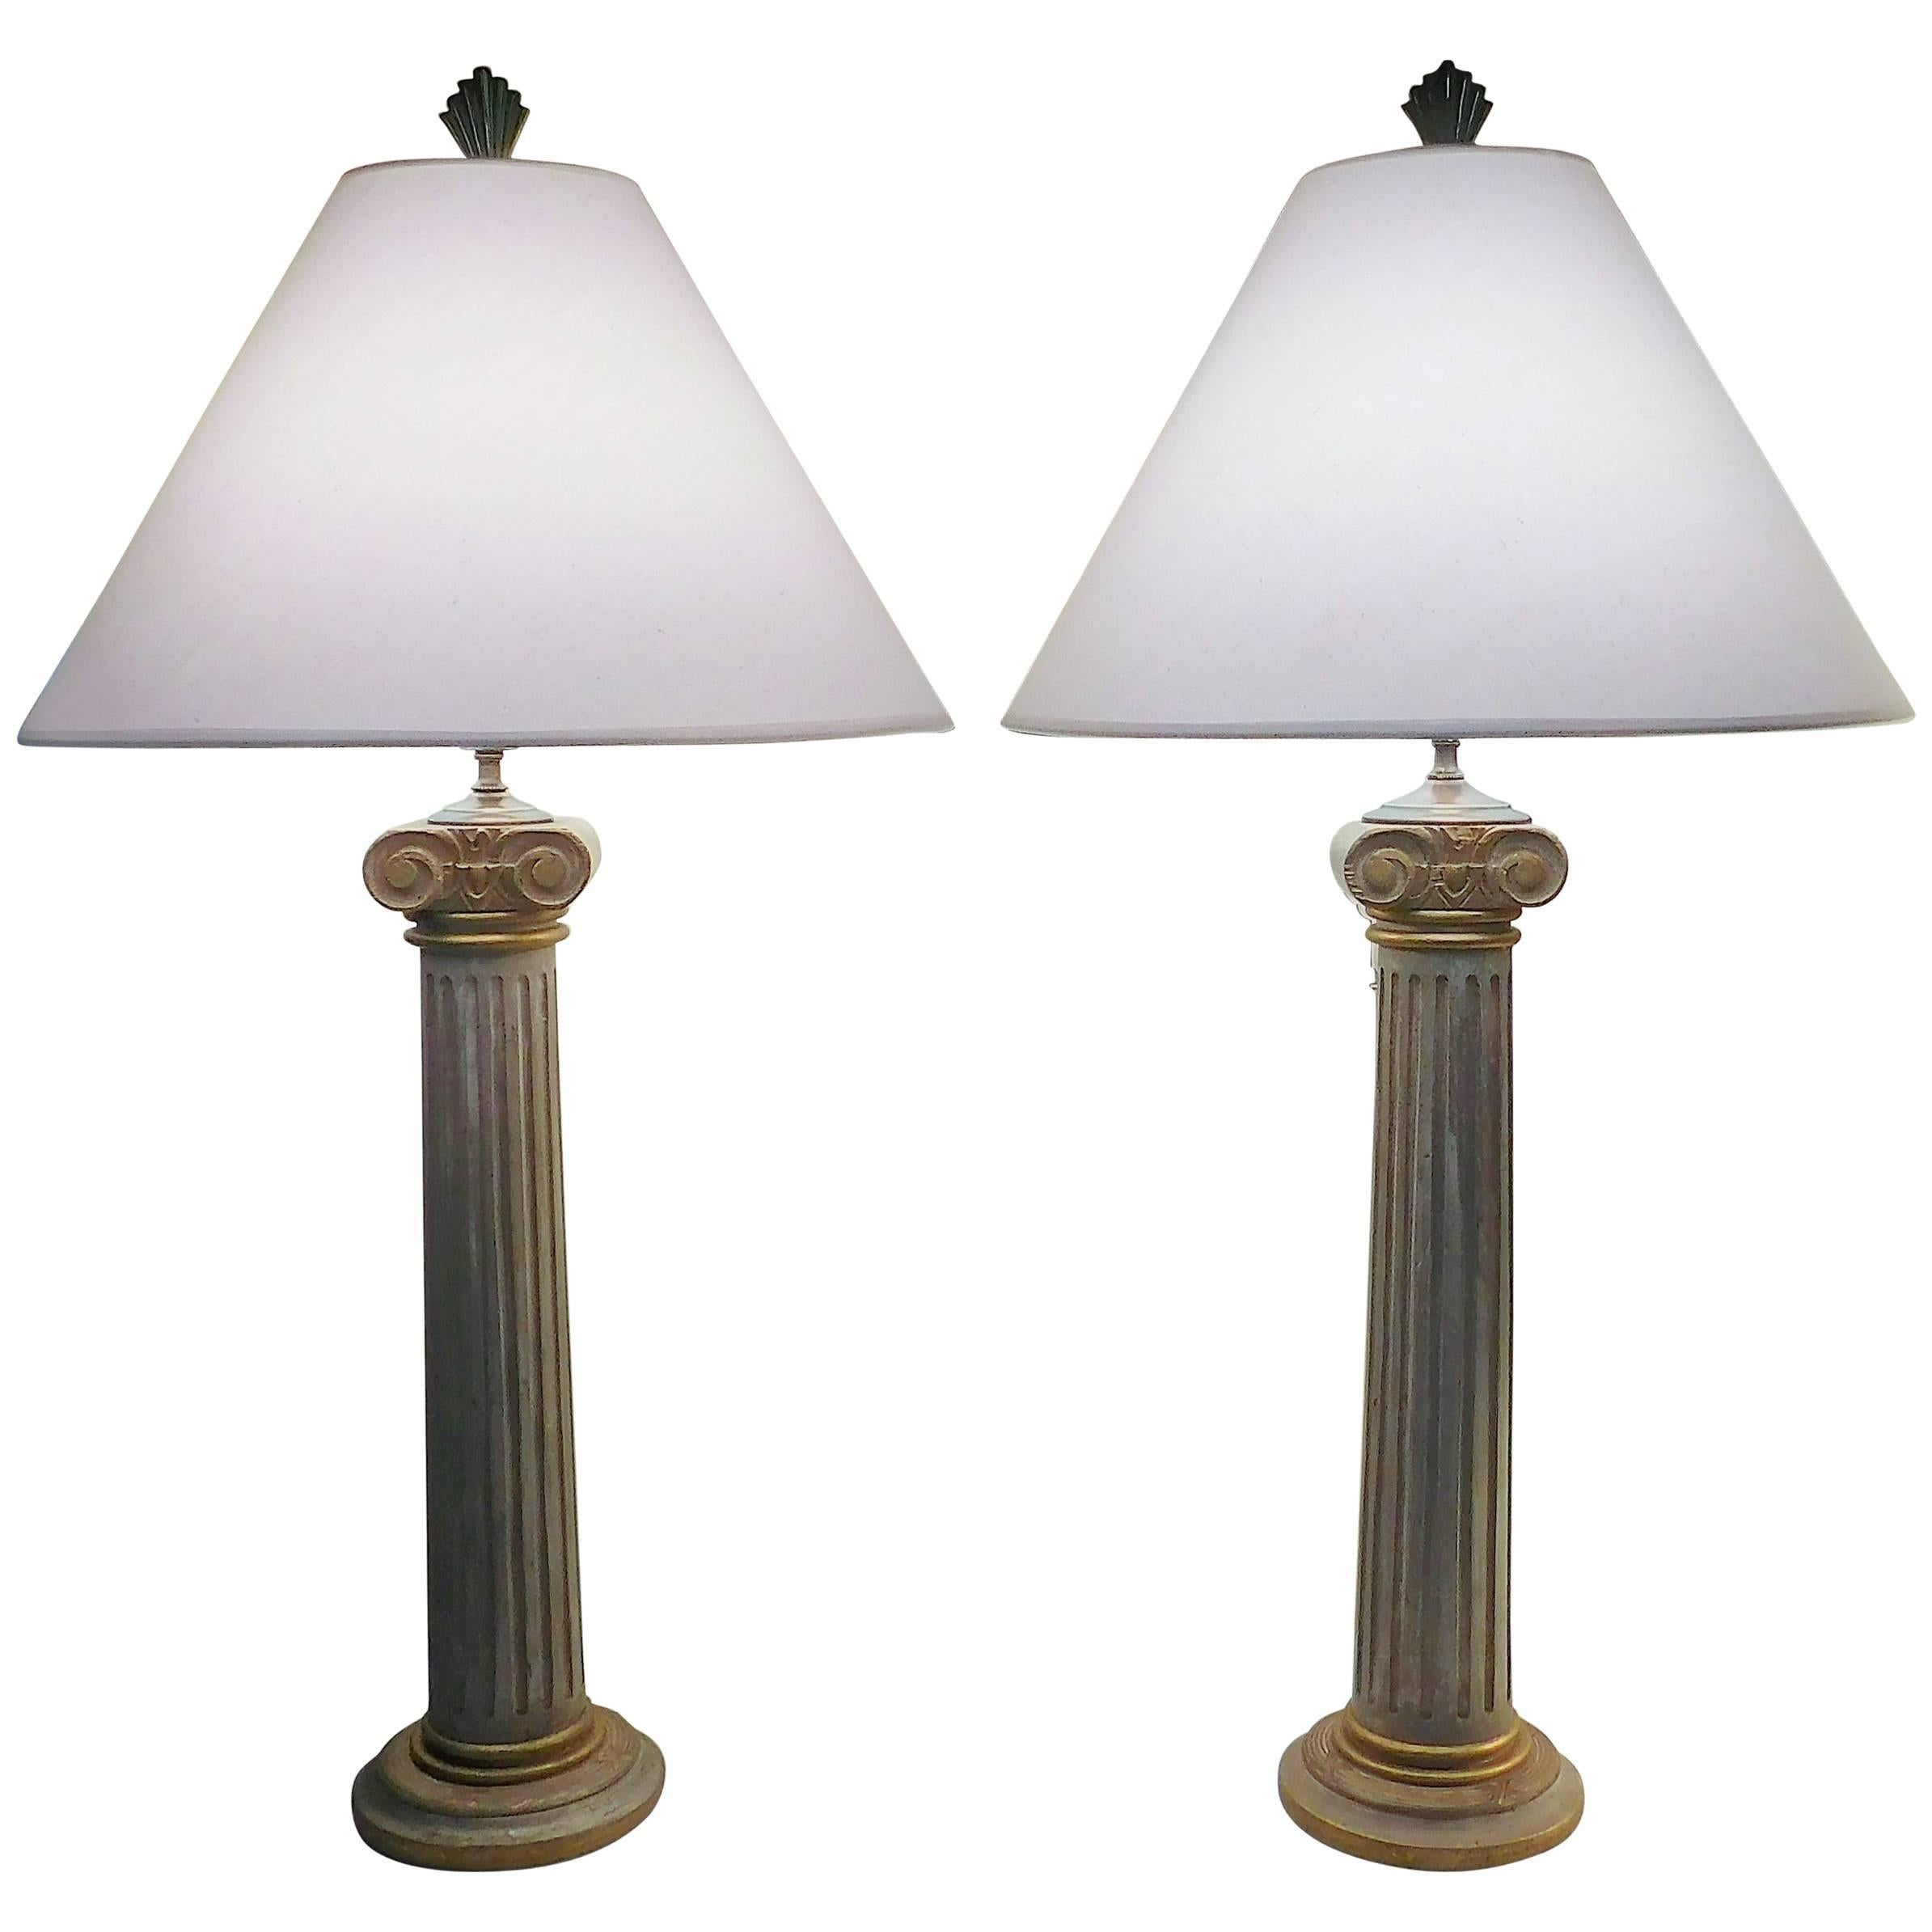 Pair of Classical Wooden Column Lamps